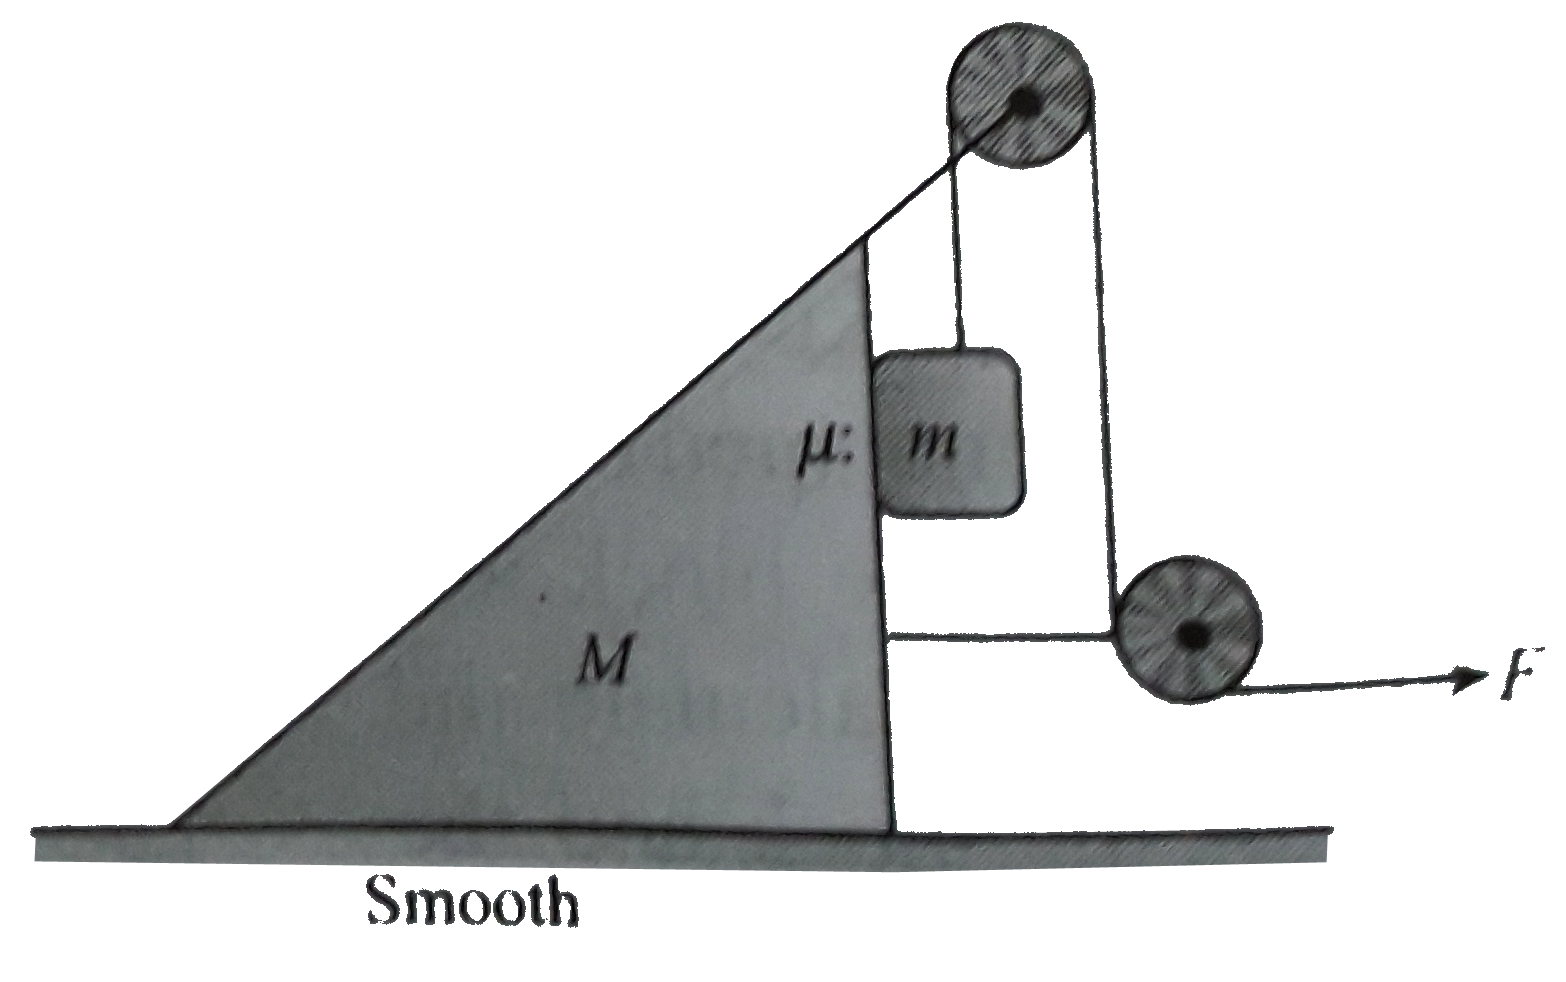 The mass of the wedge shown in fig  is M = 4 kg and that of block is m = 1 kg The horizontal surface beneath the wedge is smooth while the wedge and block is equal to mu = 0.1 Taking g = 9.8 ms^(-2) and assuming puylley to be massless and friction . calculate maximum posible value of force F upto while the block will remain stationary relative to the wedge